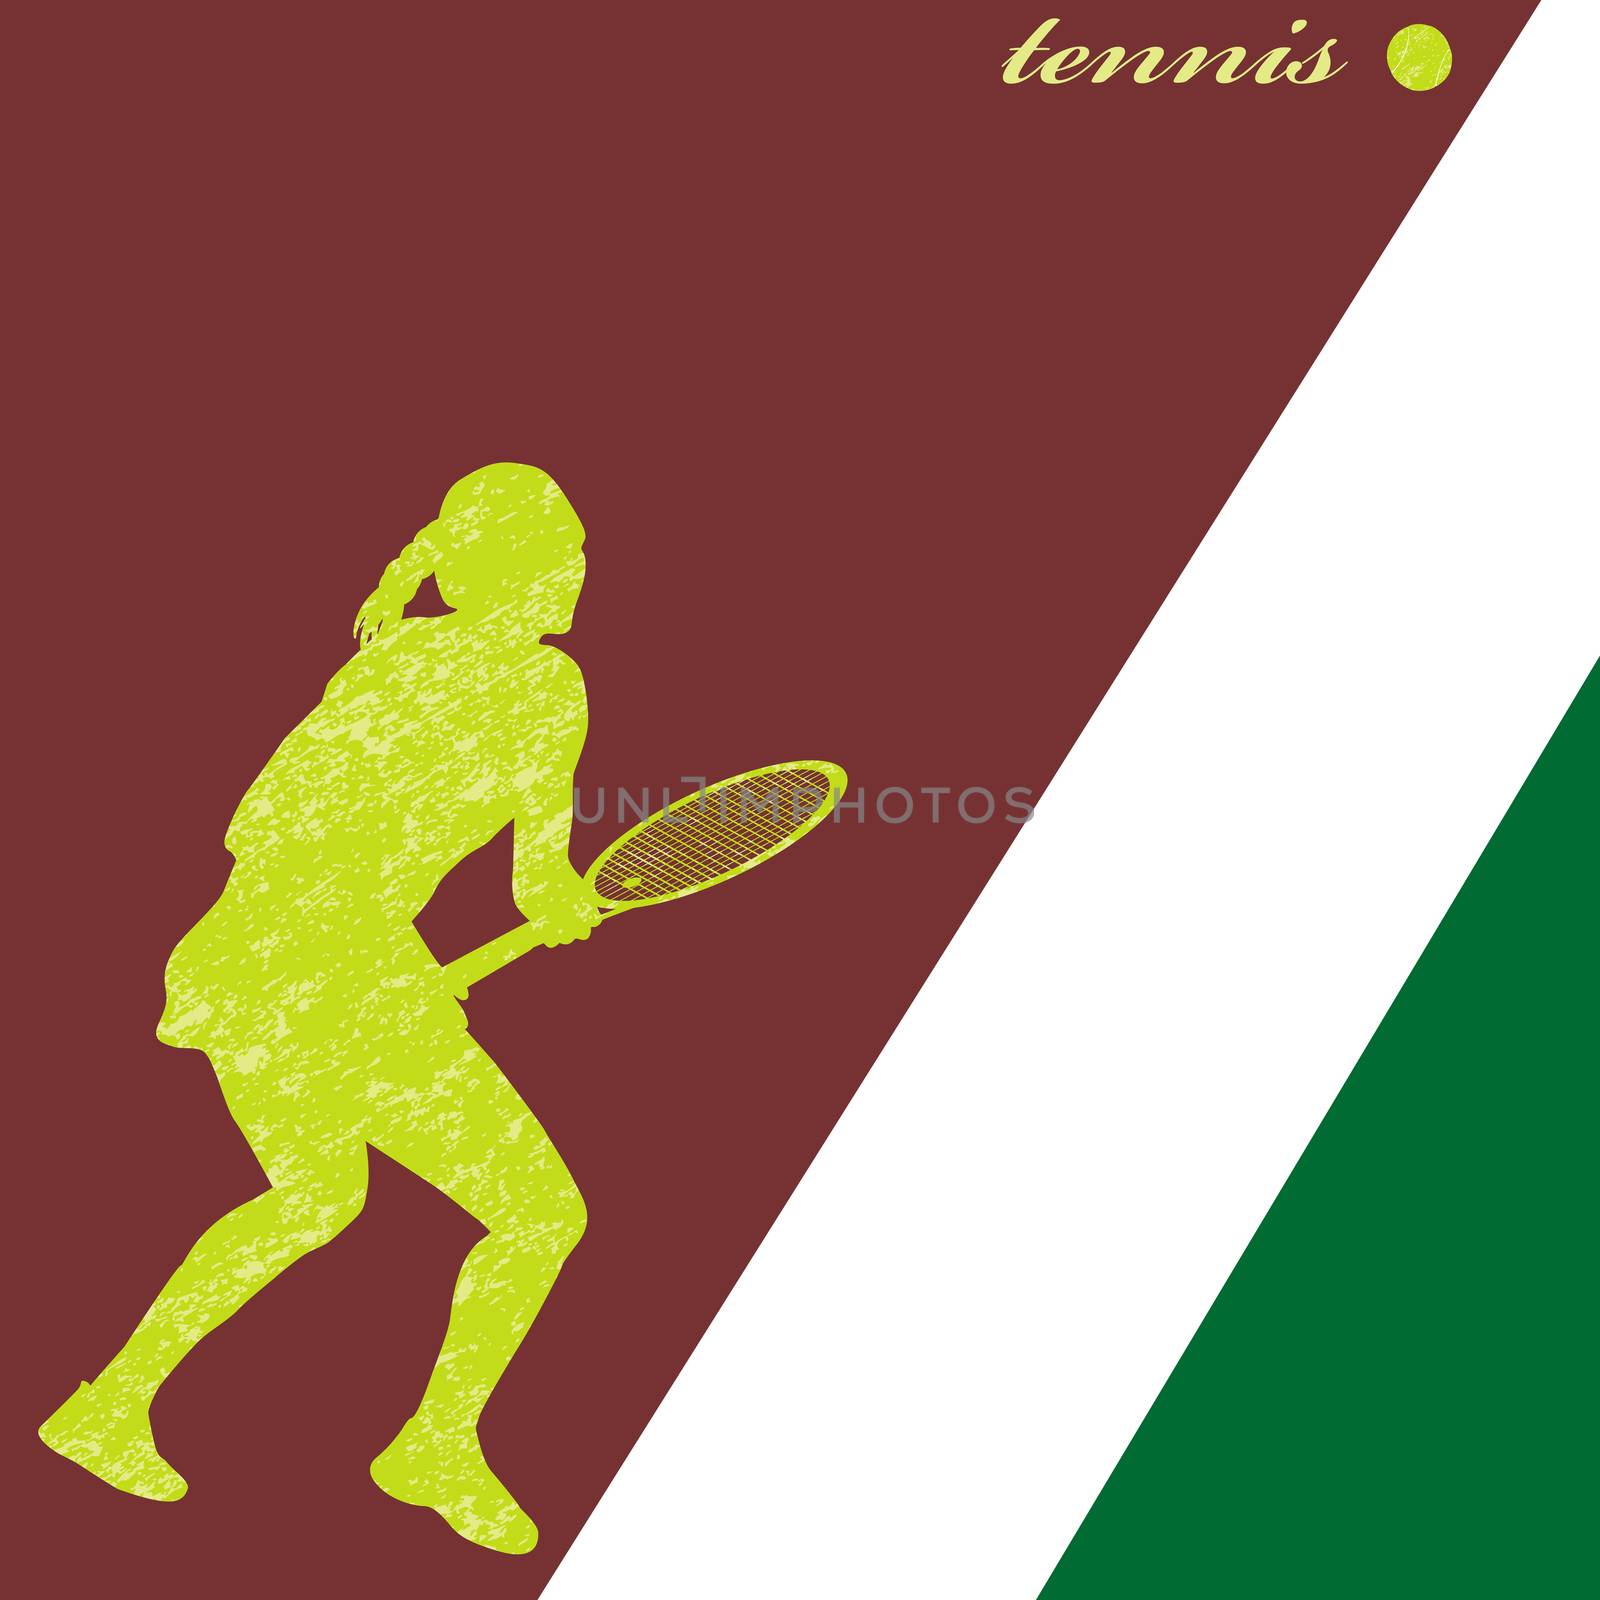 Silhouette of a tennis player by hibrida13